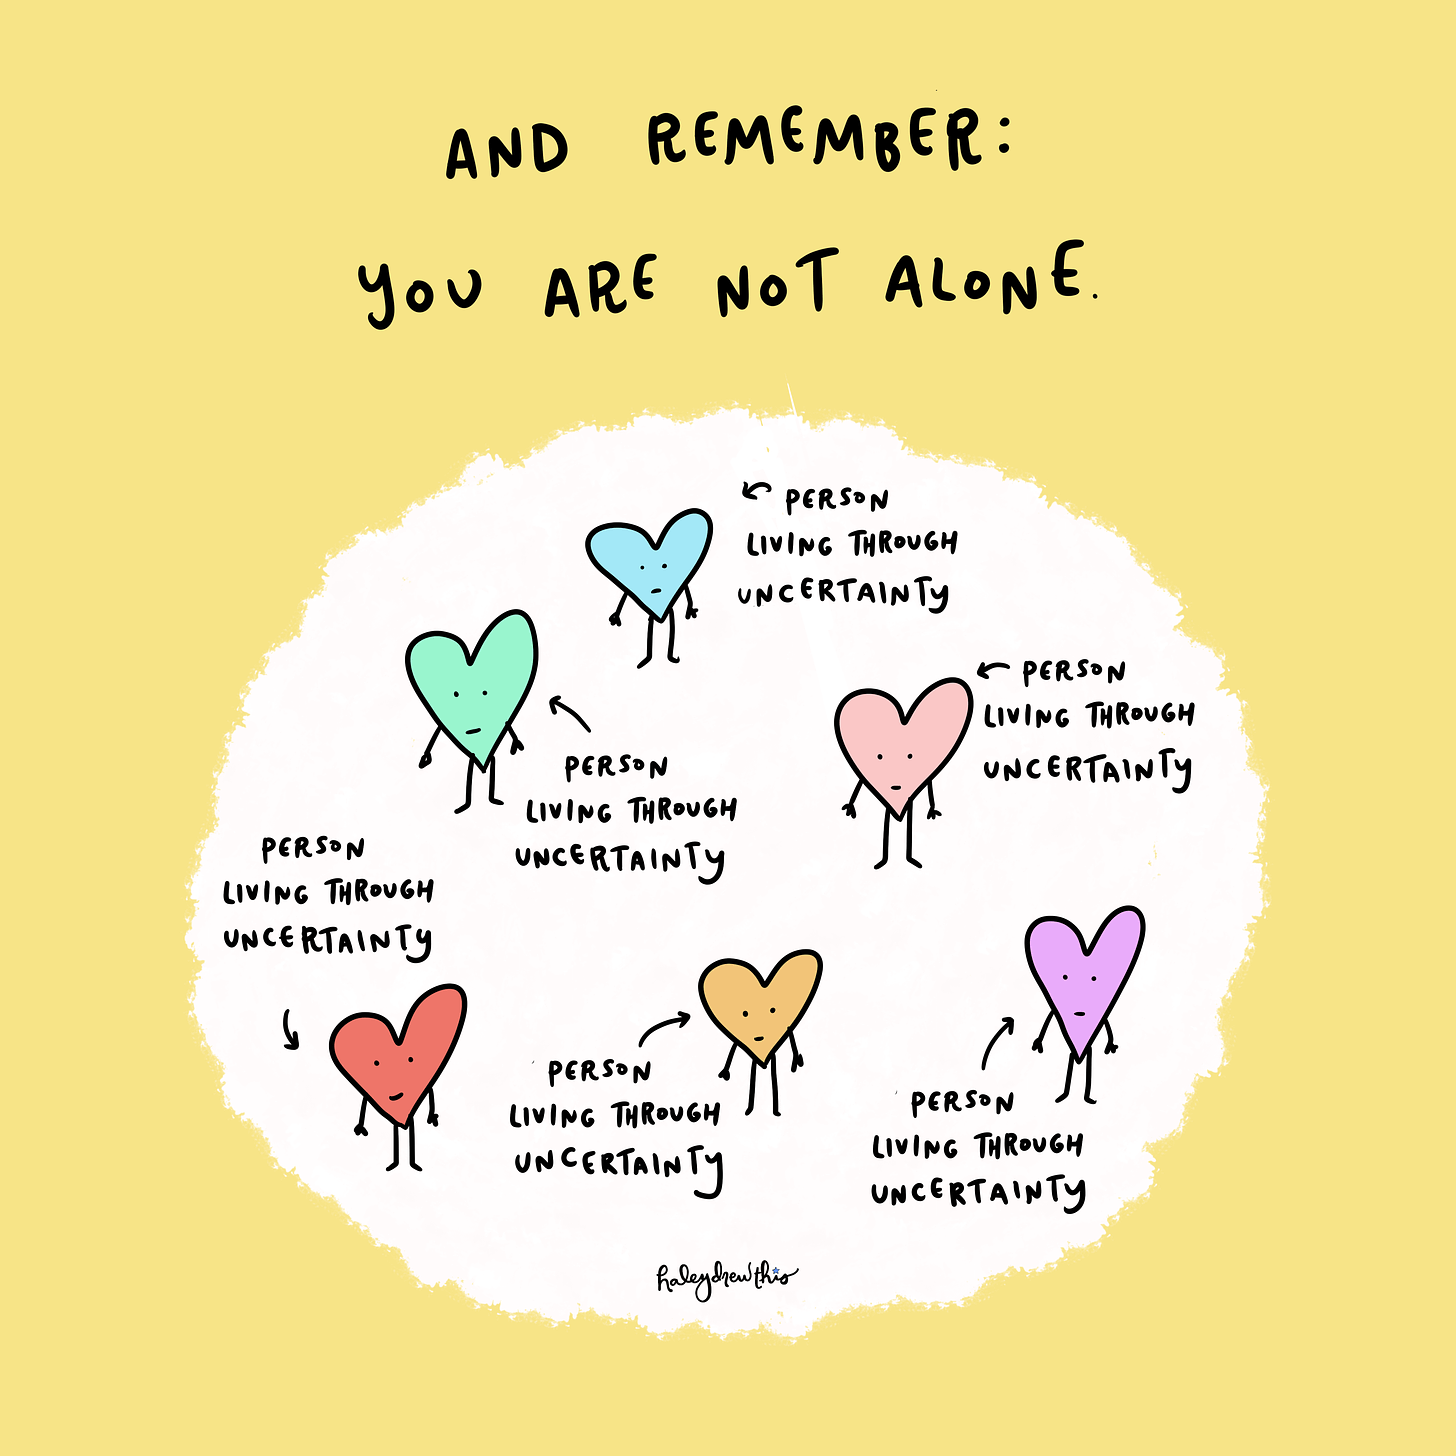 Title: And remember, you are not alone. Illustration of lots of little hearts, labeled as "person living through uncertainty."